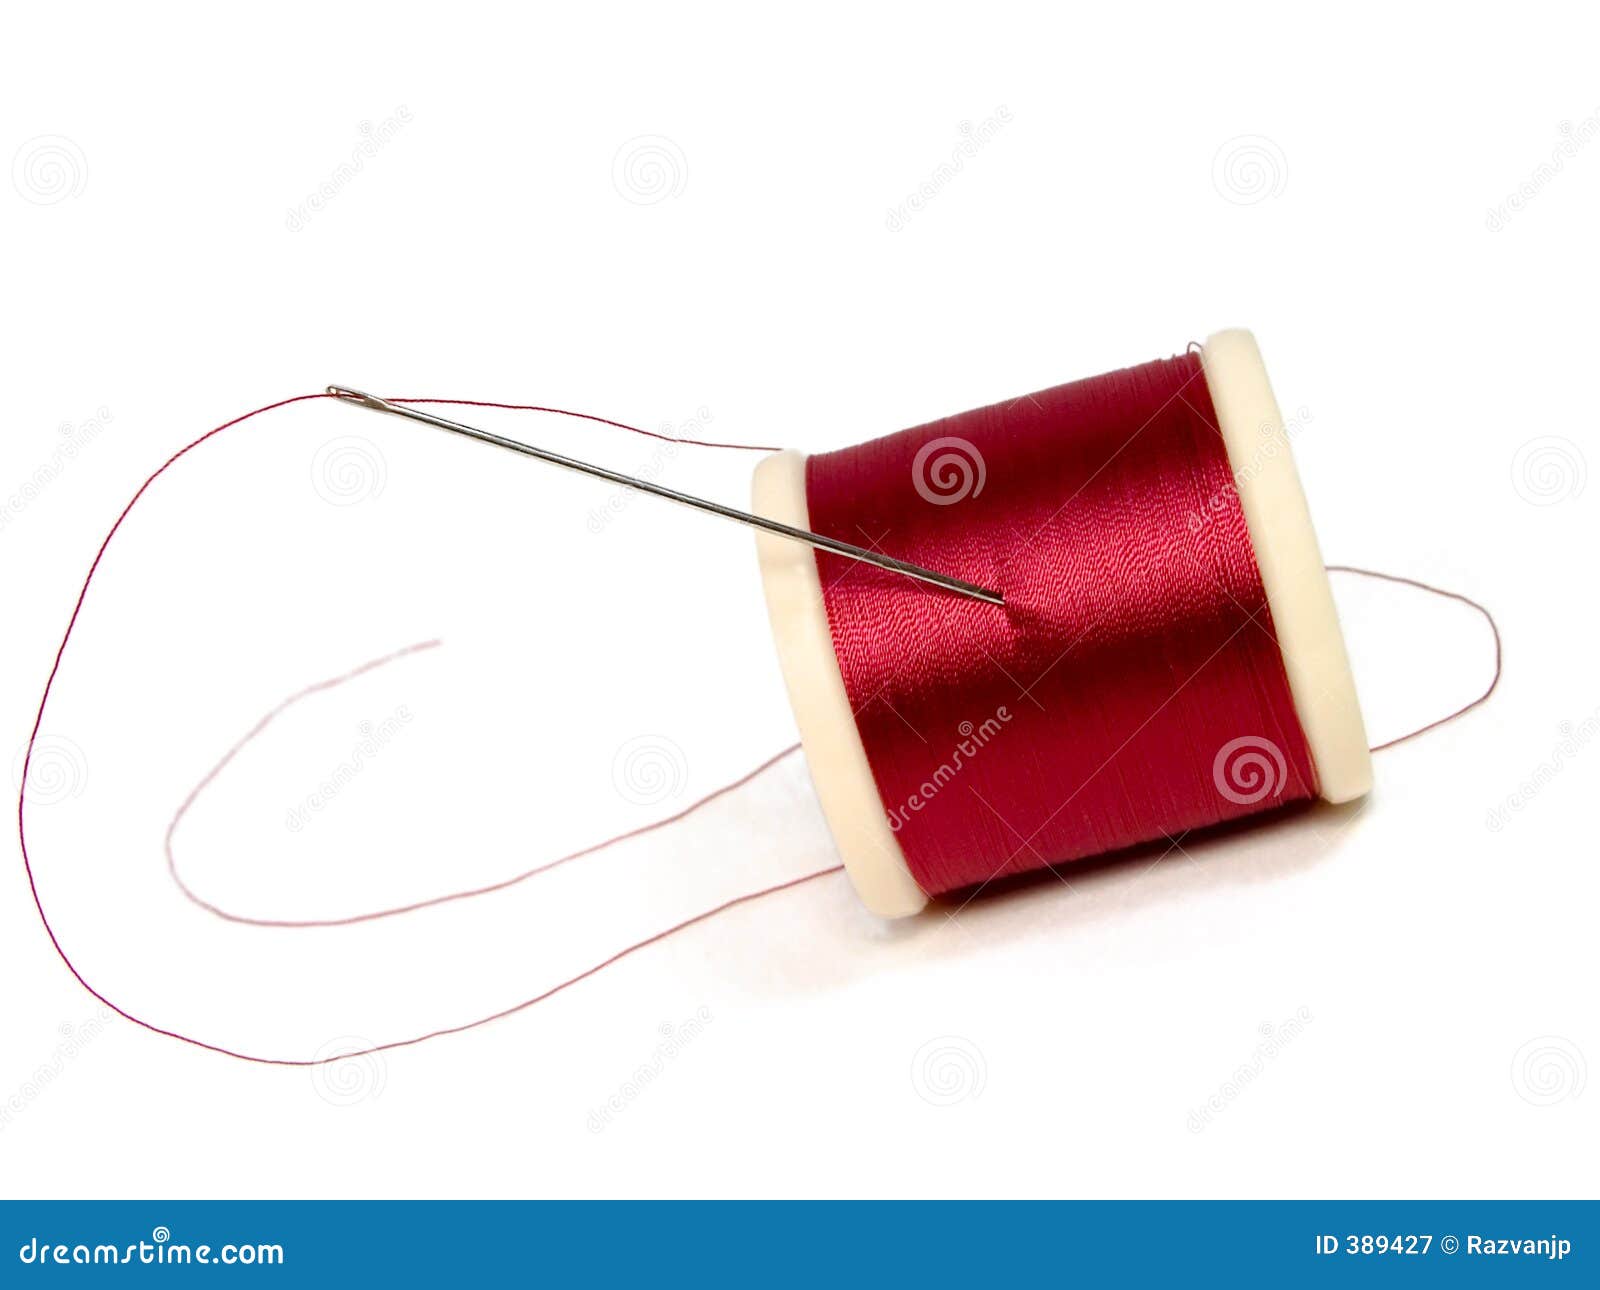 Needle and spool of thread stock image. Image of thread - 389427